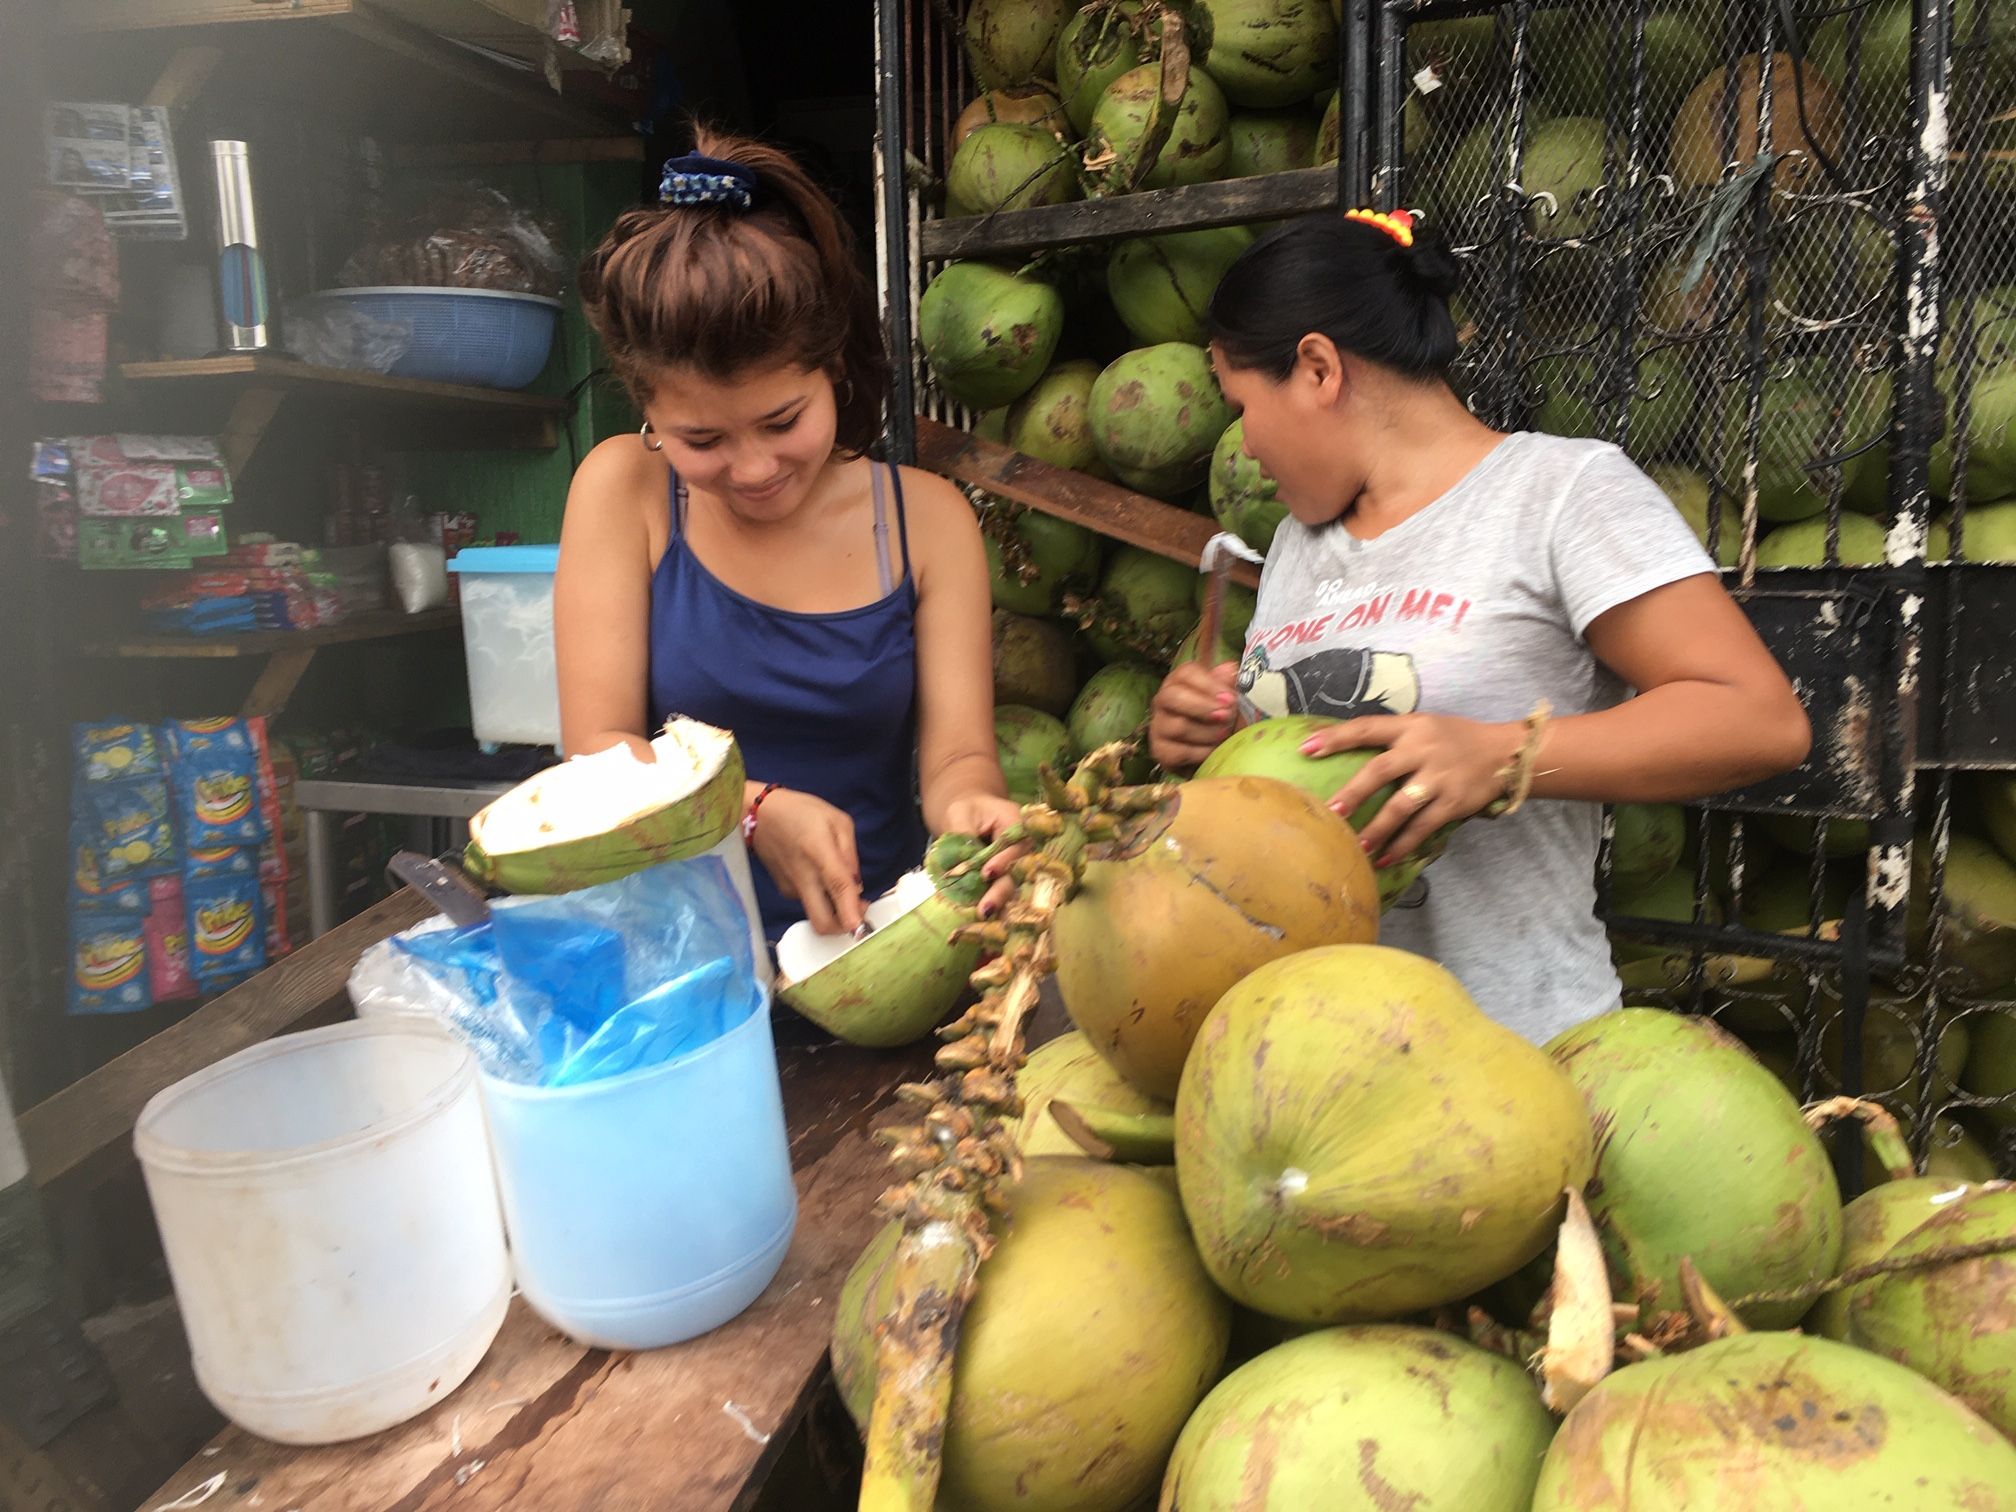 A coconut stand in Manila. The online gambling business is booming in the Philippines, but its many critics complain that rising rents and social problems caused by it are harming ordinary Filipinos. Image by Richard Bernstein. Philippines, 2020.